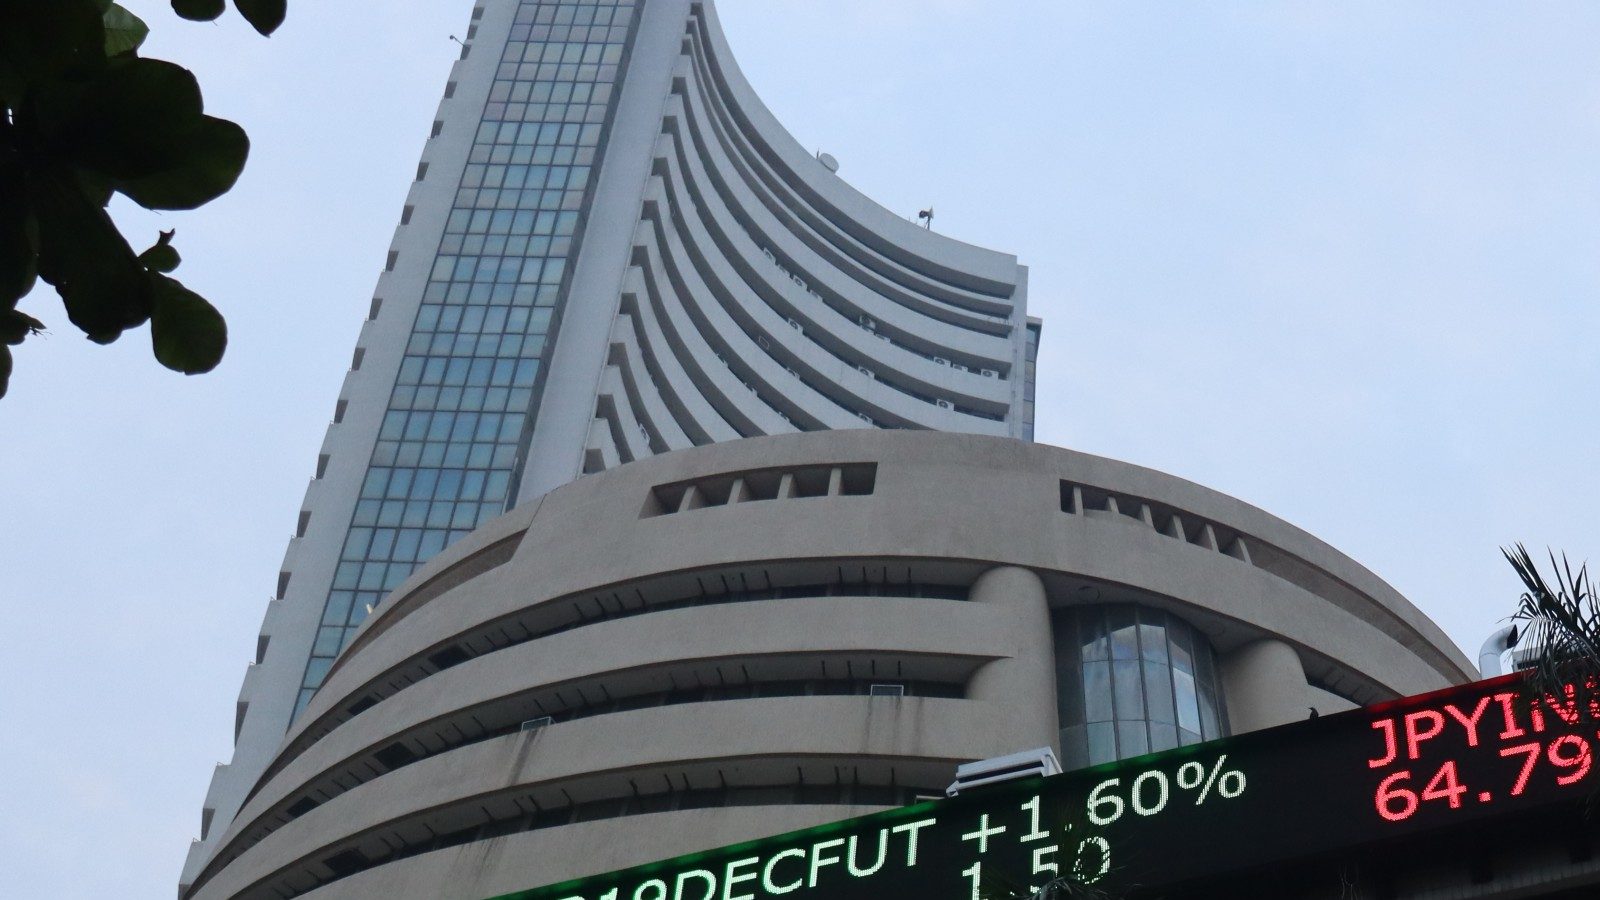 Stock Market: Sensex Drops 200 pts; Nifty Around 200. What Investors Should do Now